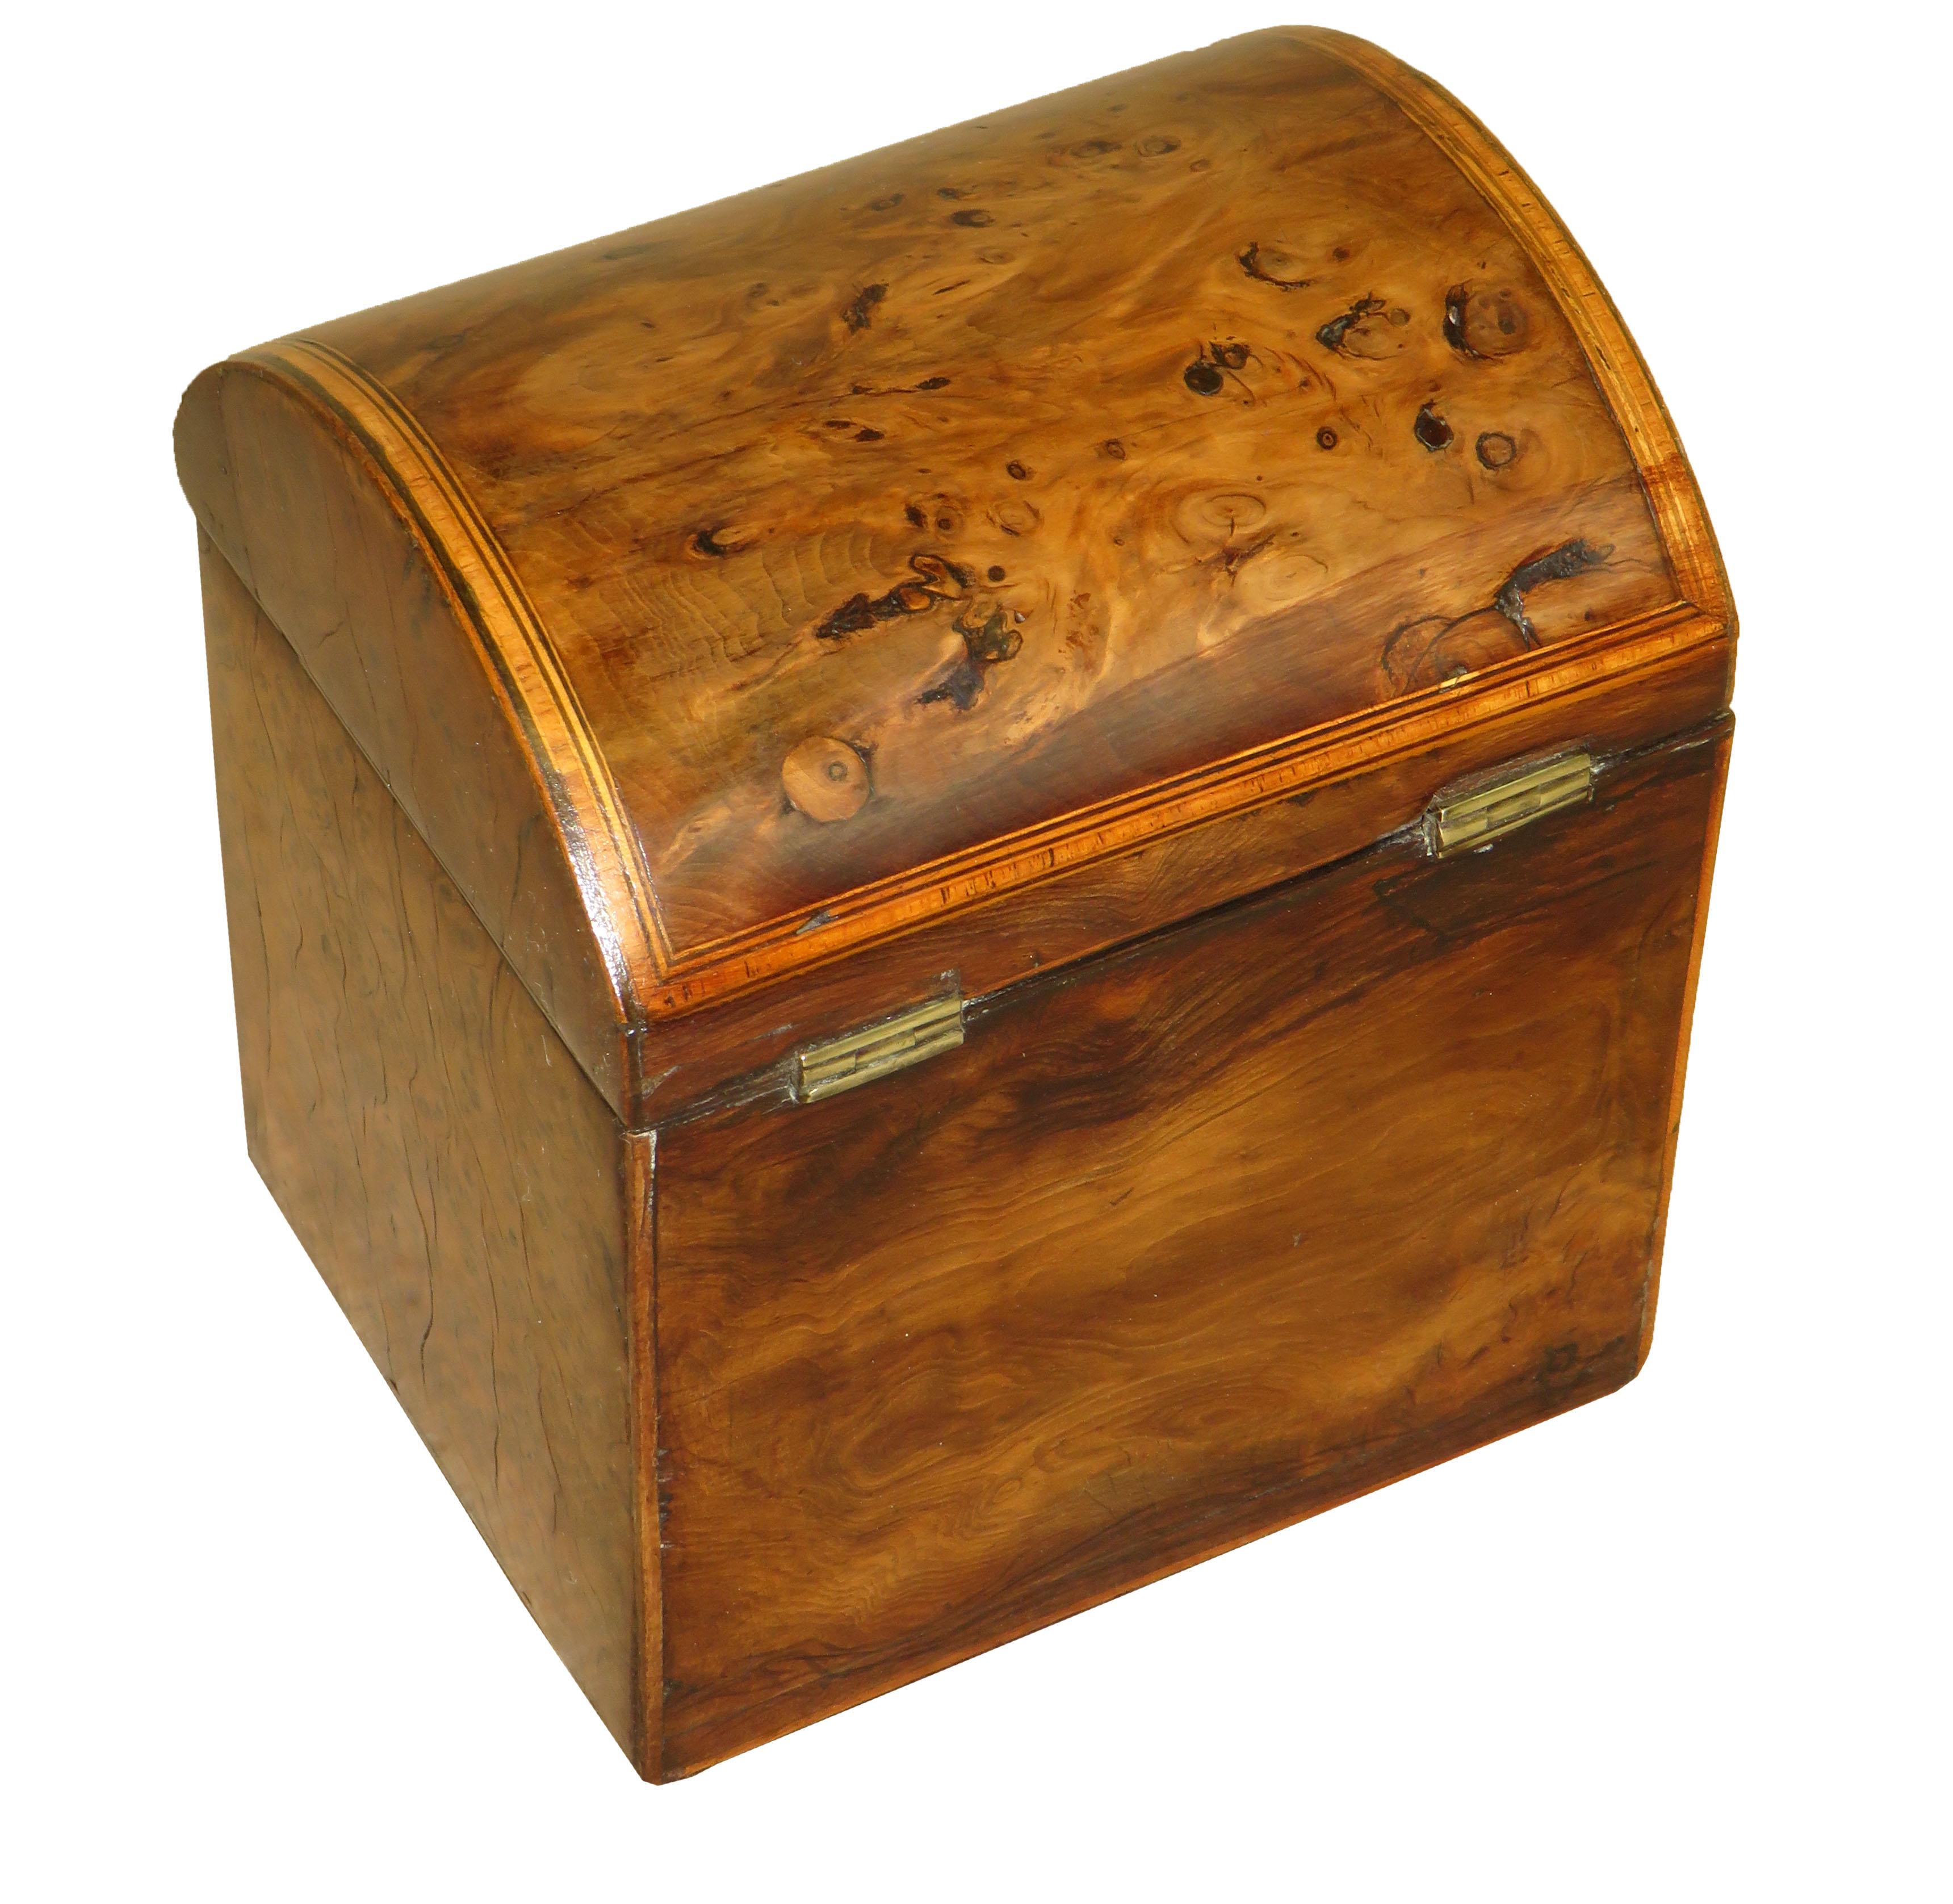 A delightful late 18th century George III period burr
yew wood tea caddy having domed lid and crossbanded
decoration with fully working lock and key.

(Tea caddies were used to both preserve the tea leaves, but also
to lock it away and protect